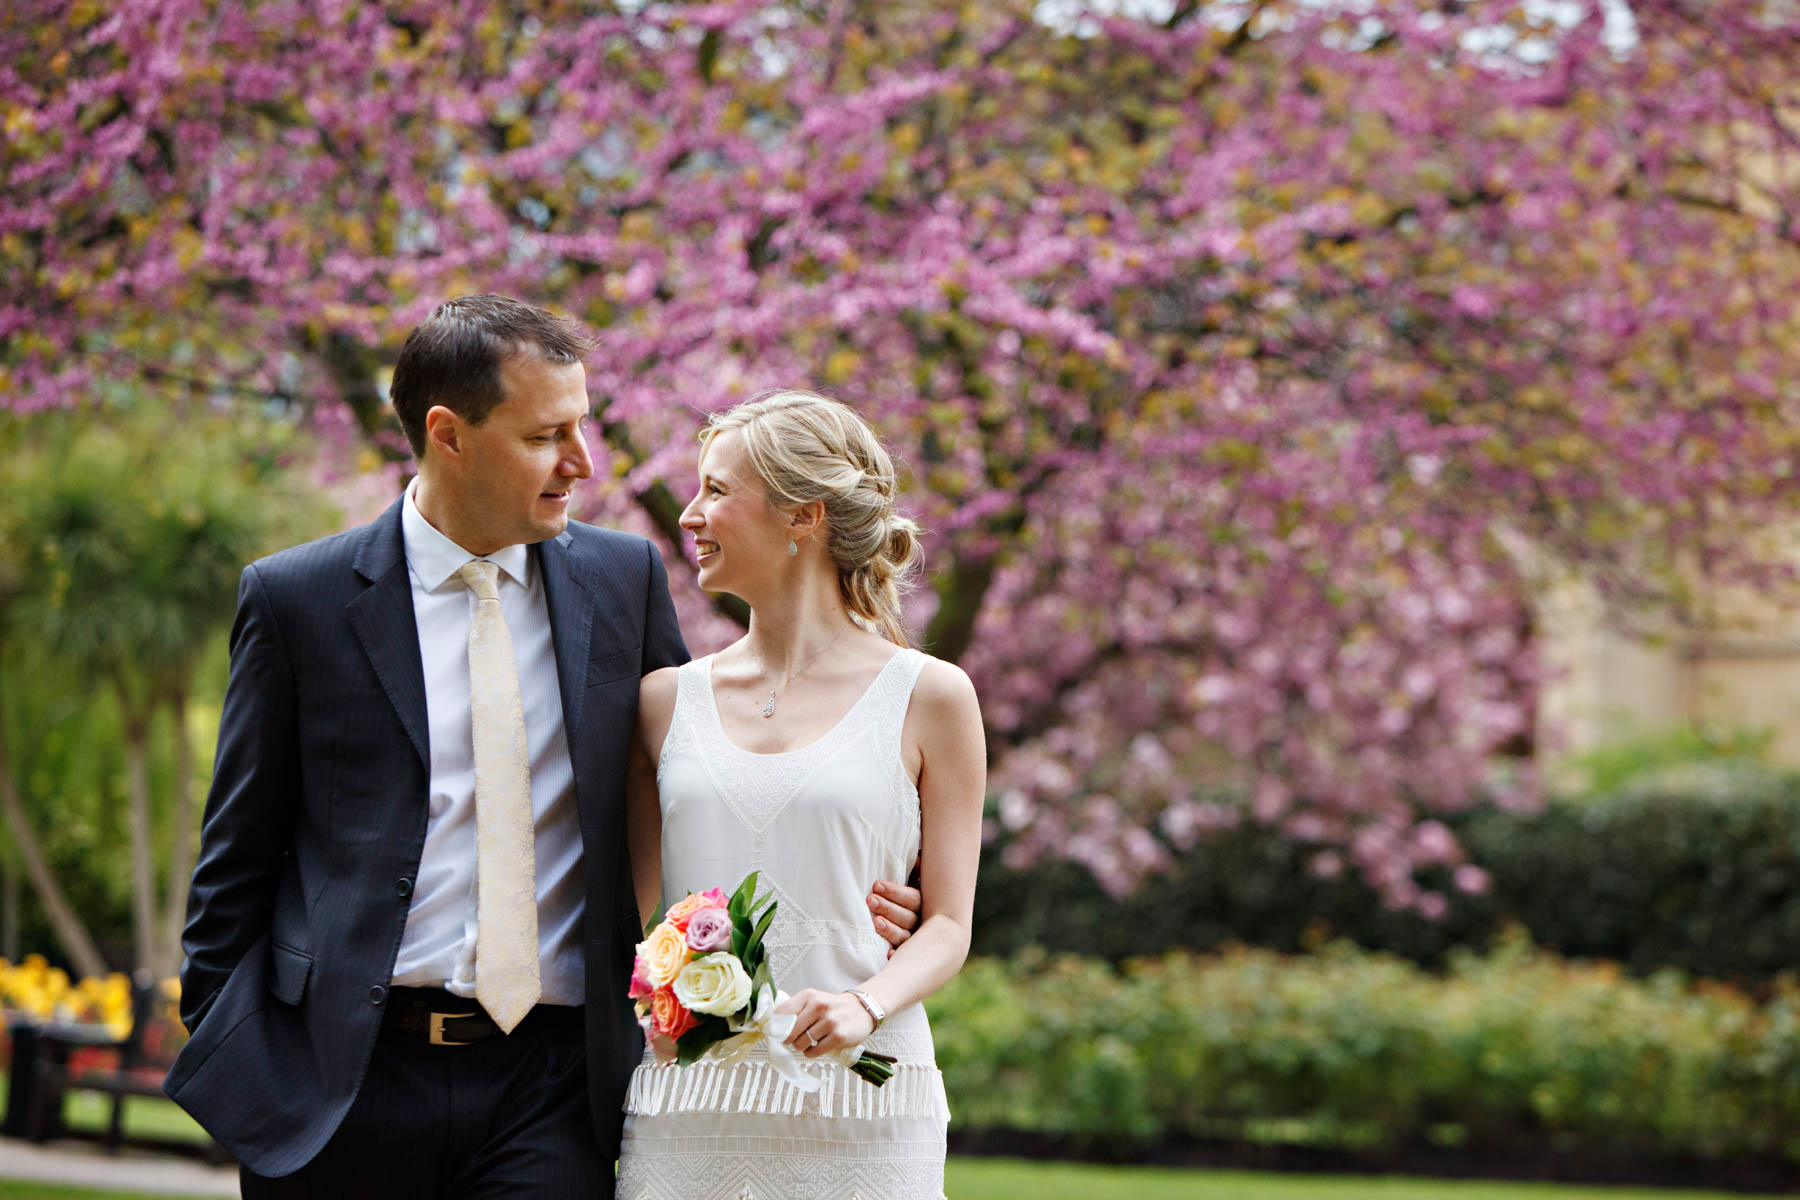 Spring wedding portrait in the park with pink cherry blossom in the background, after these newlyweds eloped to Chelsea Old Town Hall.